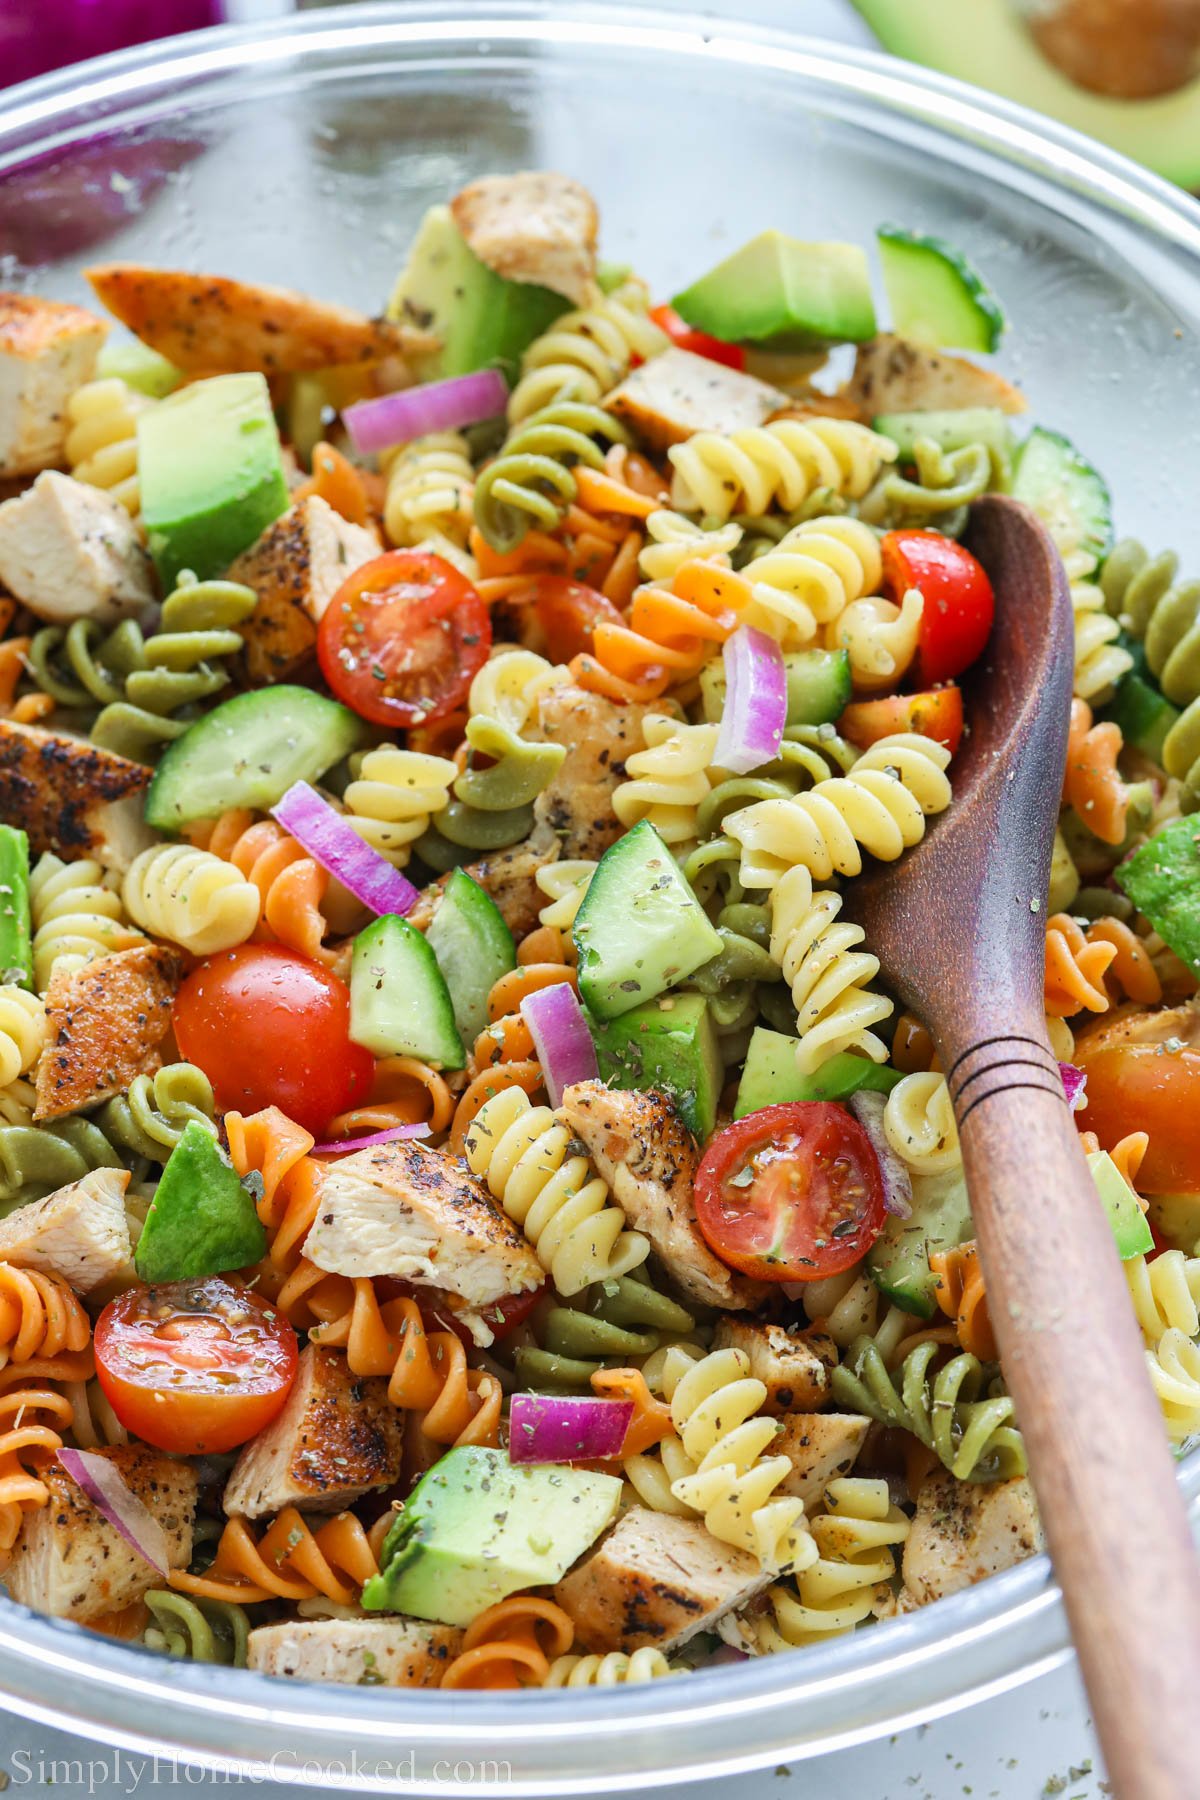 Chicken Pasta Salad with tomatoes, cucumber, avocado, onions, rotini, and chicken in a bowl with a wooden spoon.